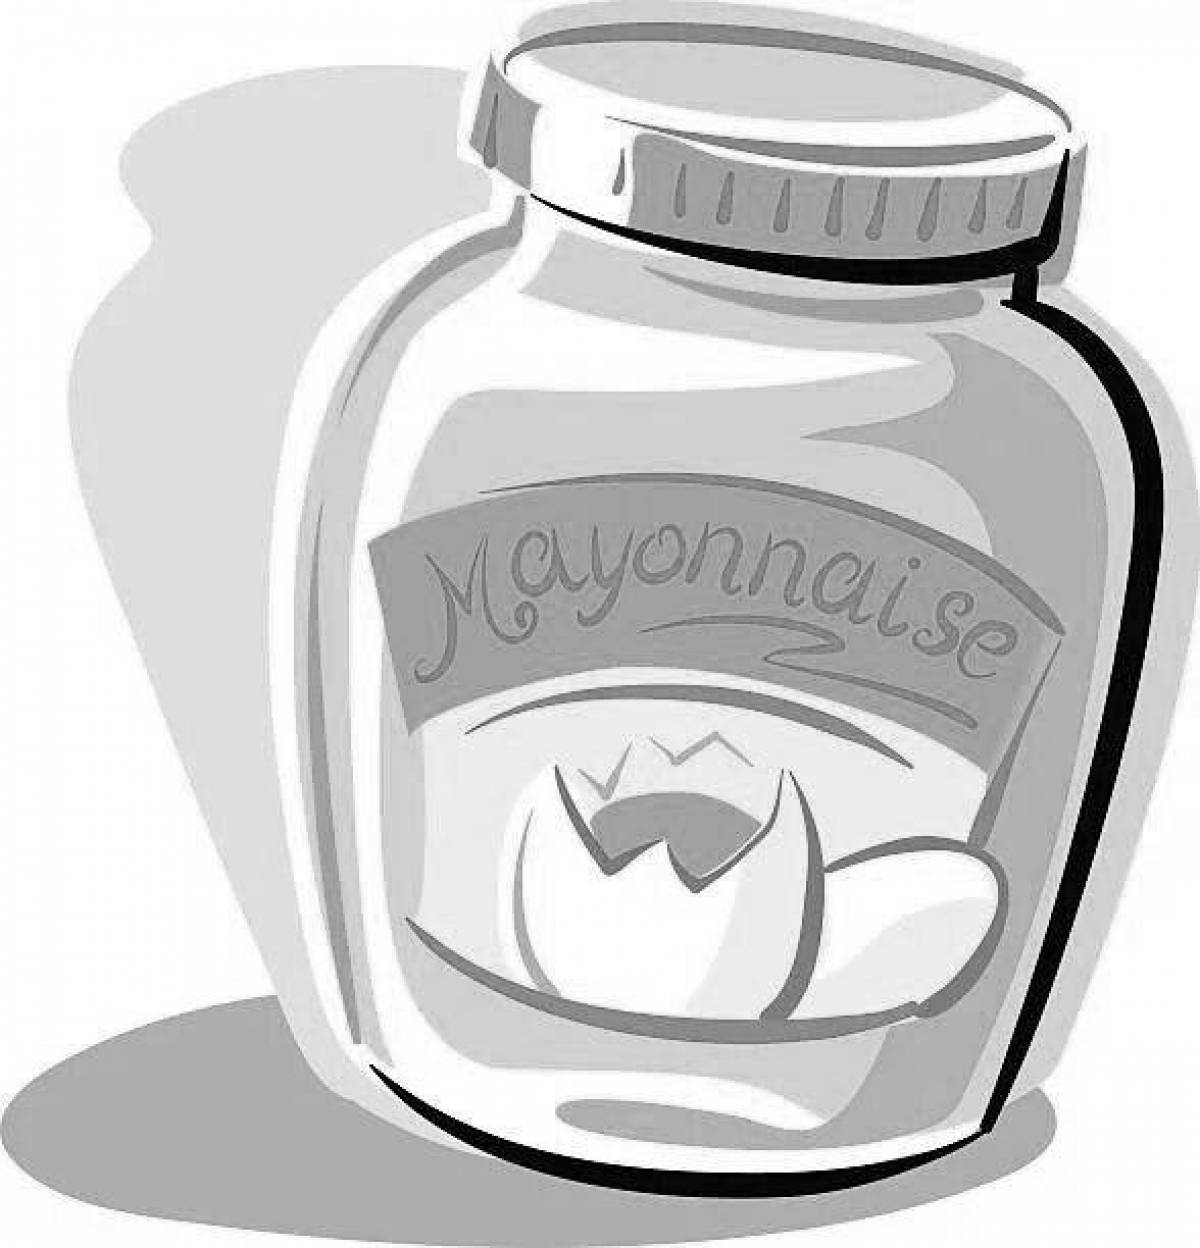 Playful mayonnaise coloring page